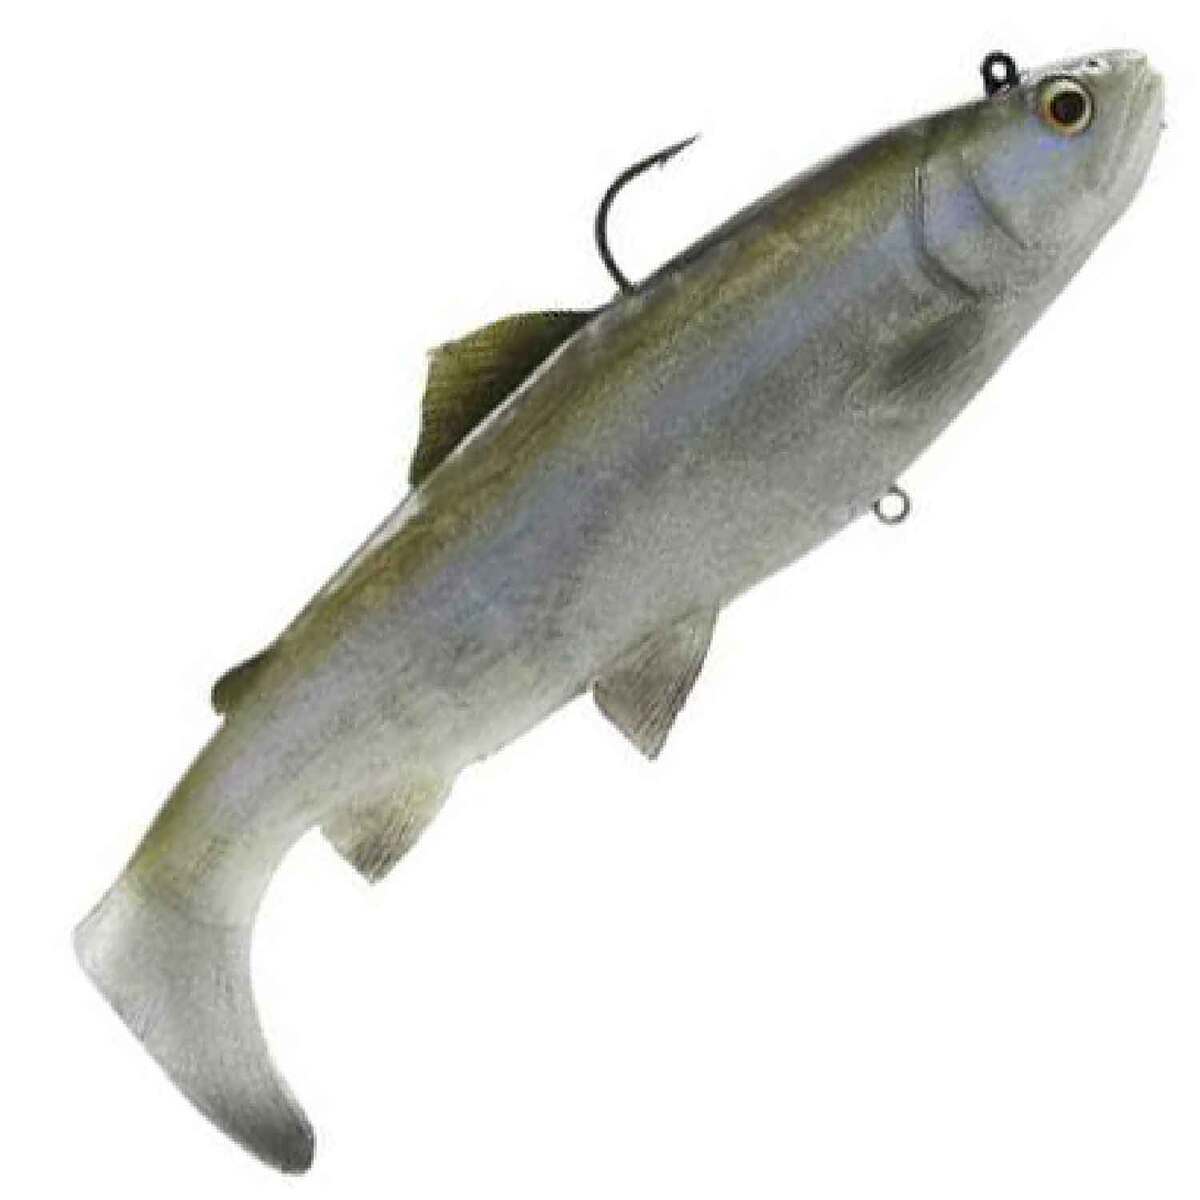 Savage Gear 3D Trout - Dogfish Tackle & Marine